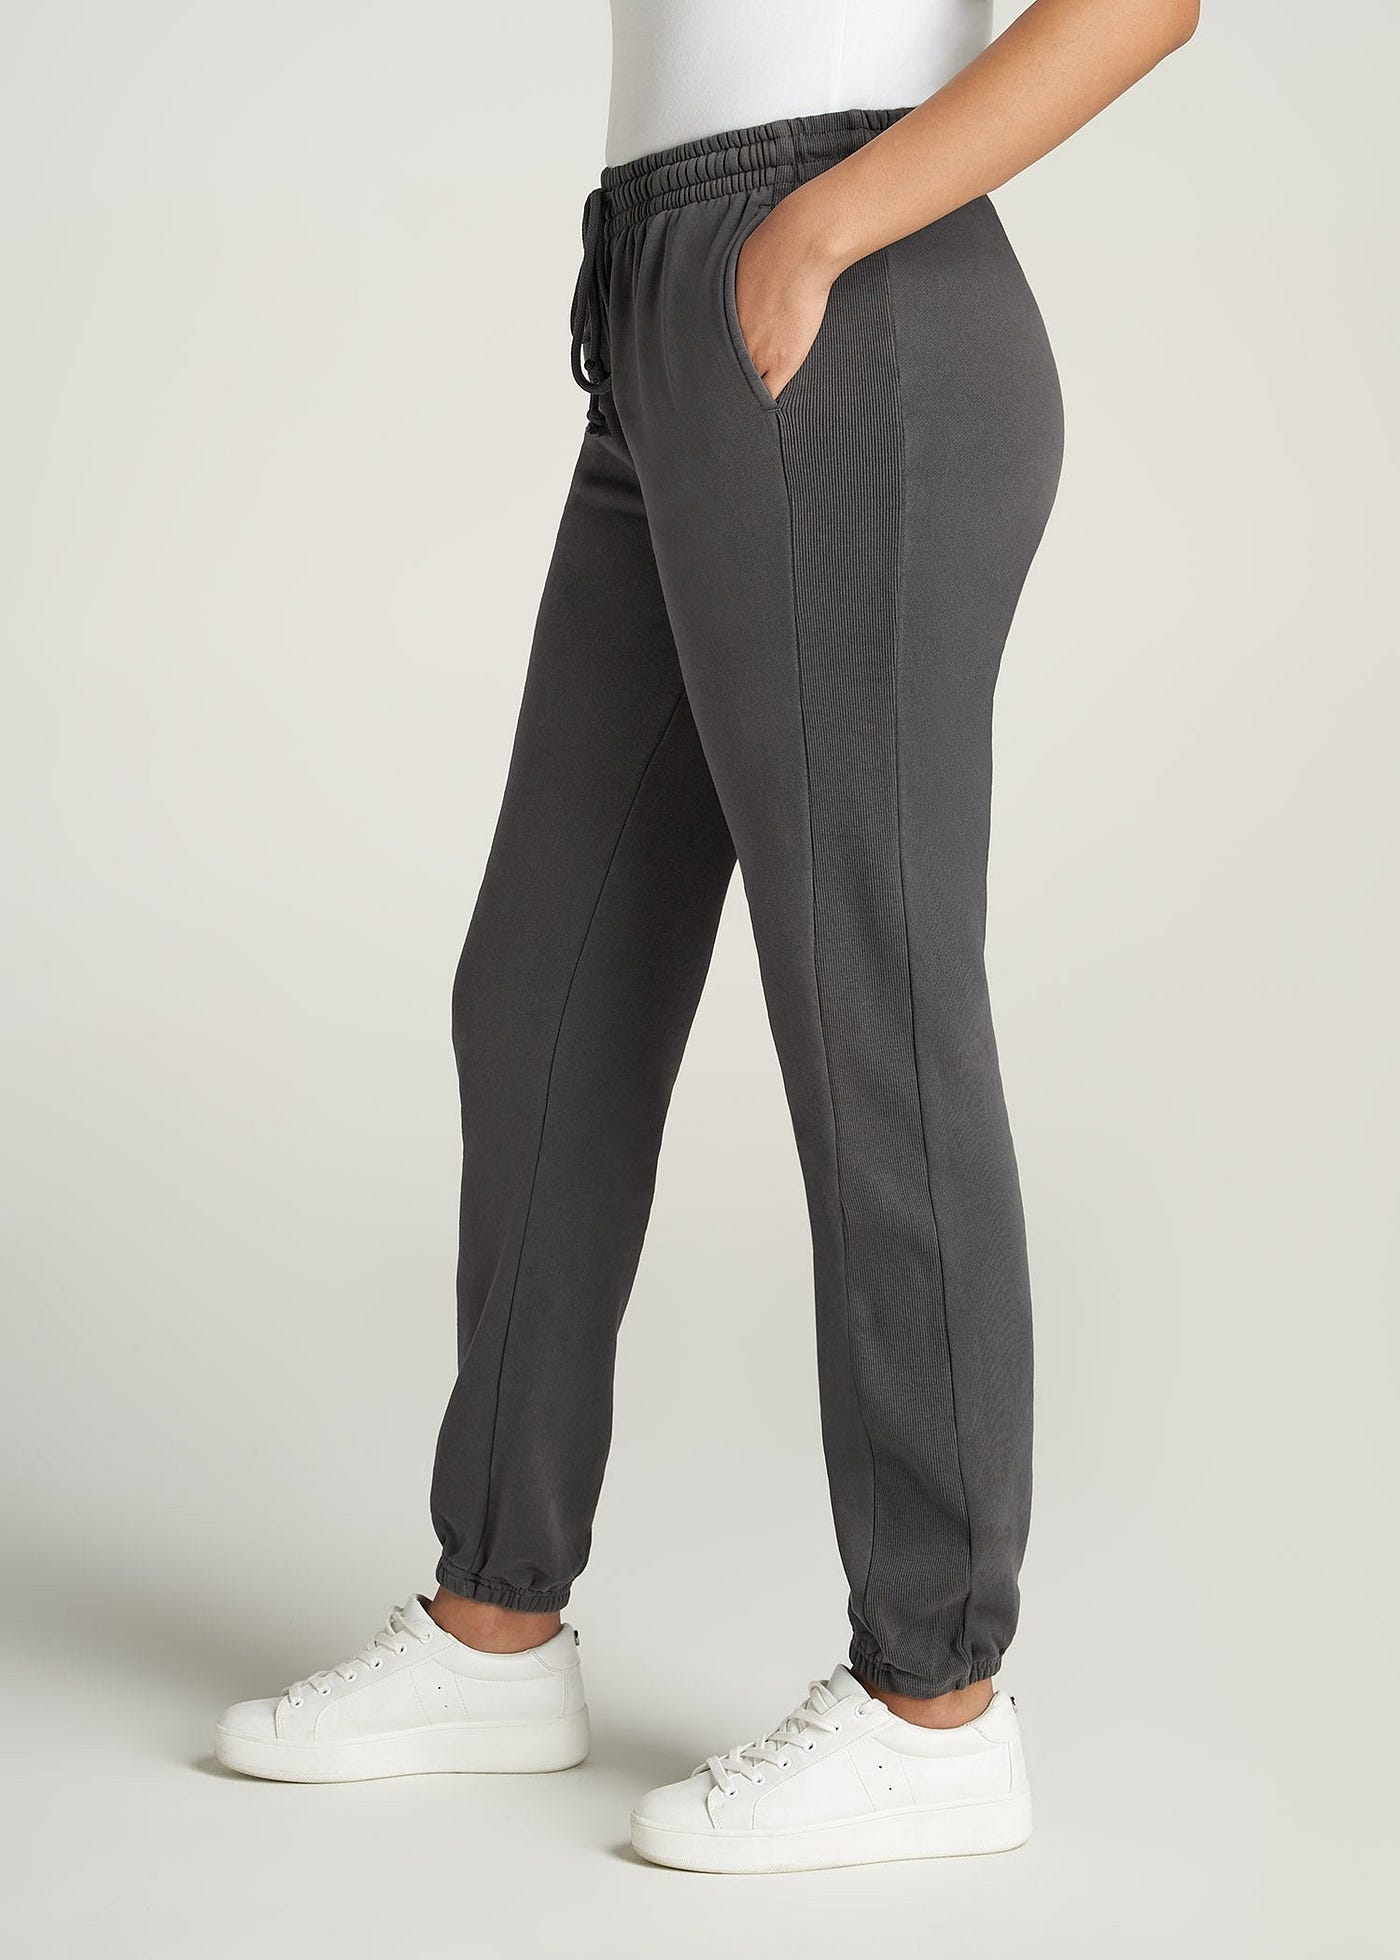 Sweatpants Fashion for Tall Women: Tips and Tricks